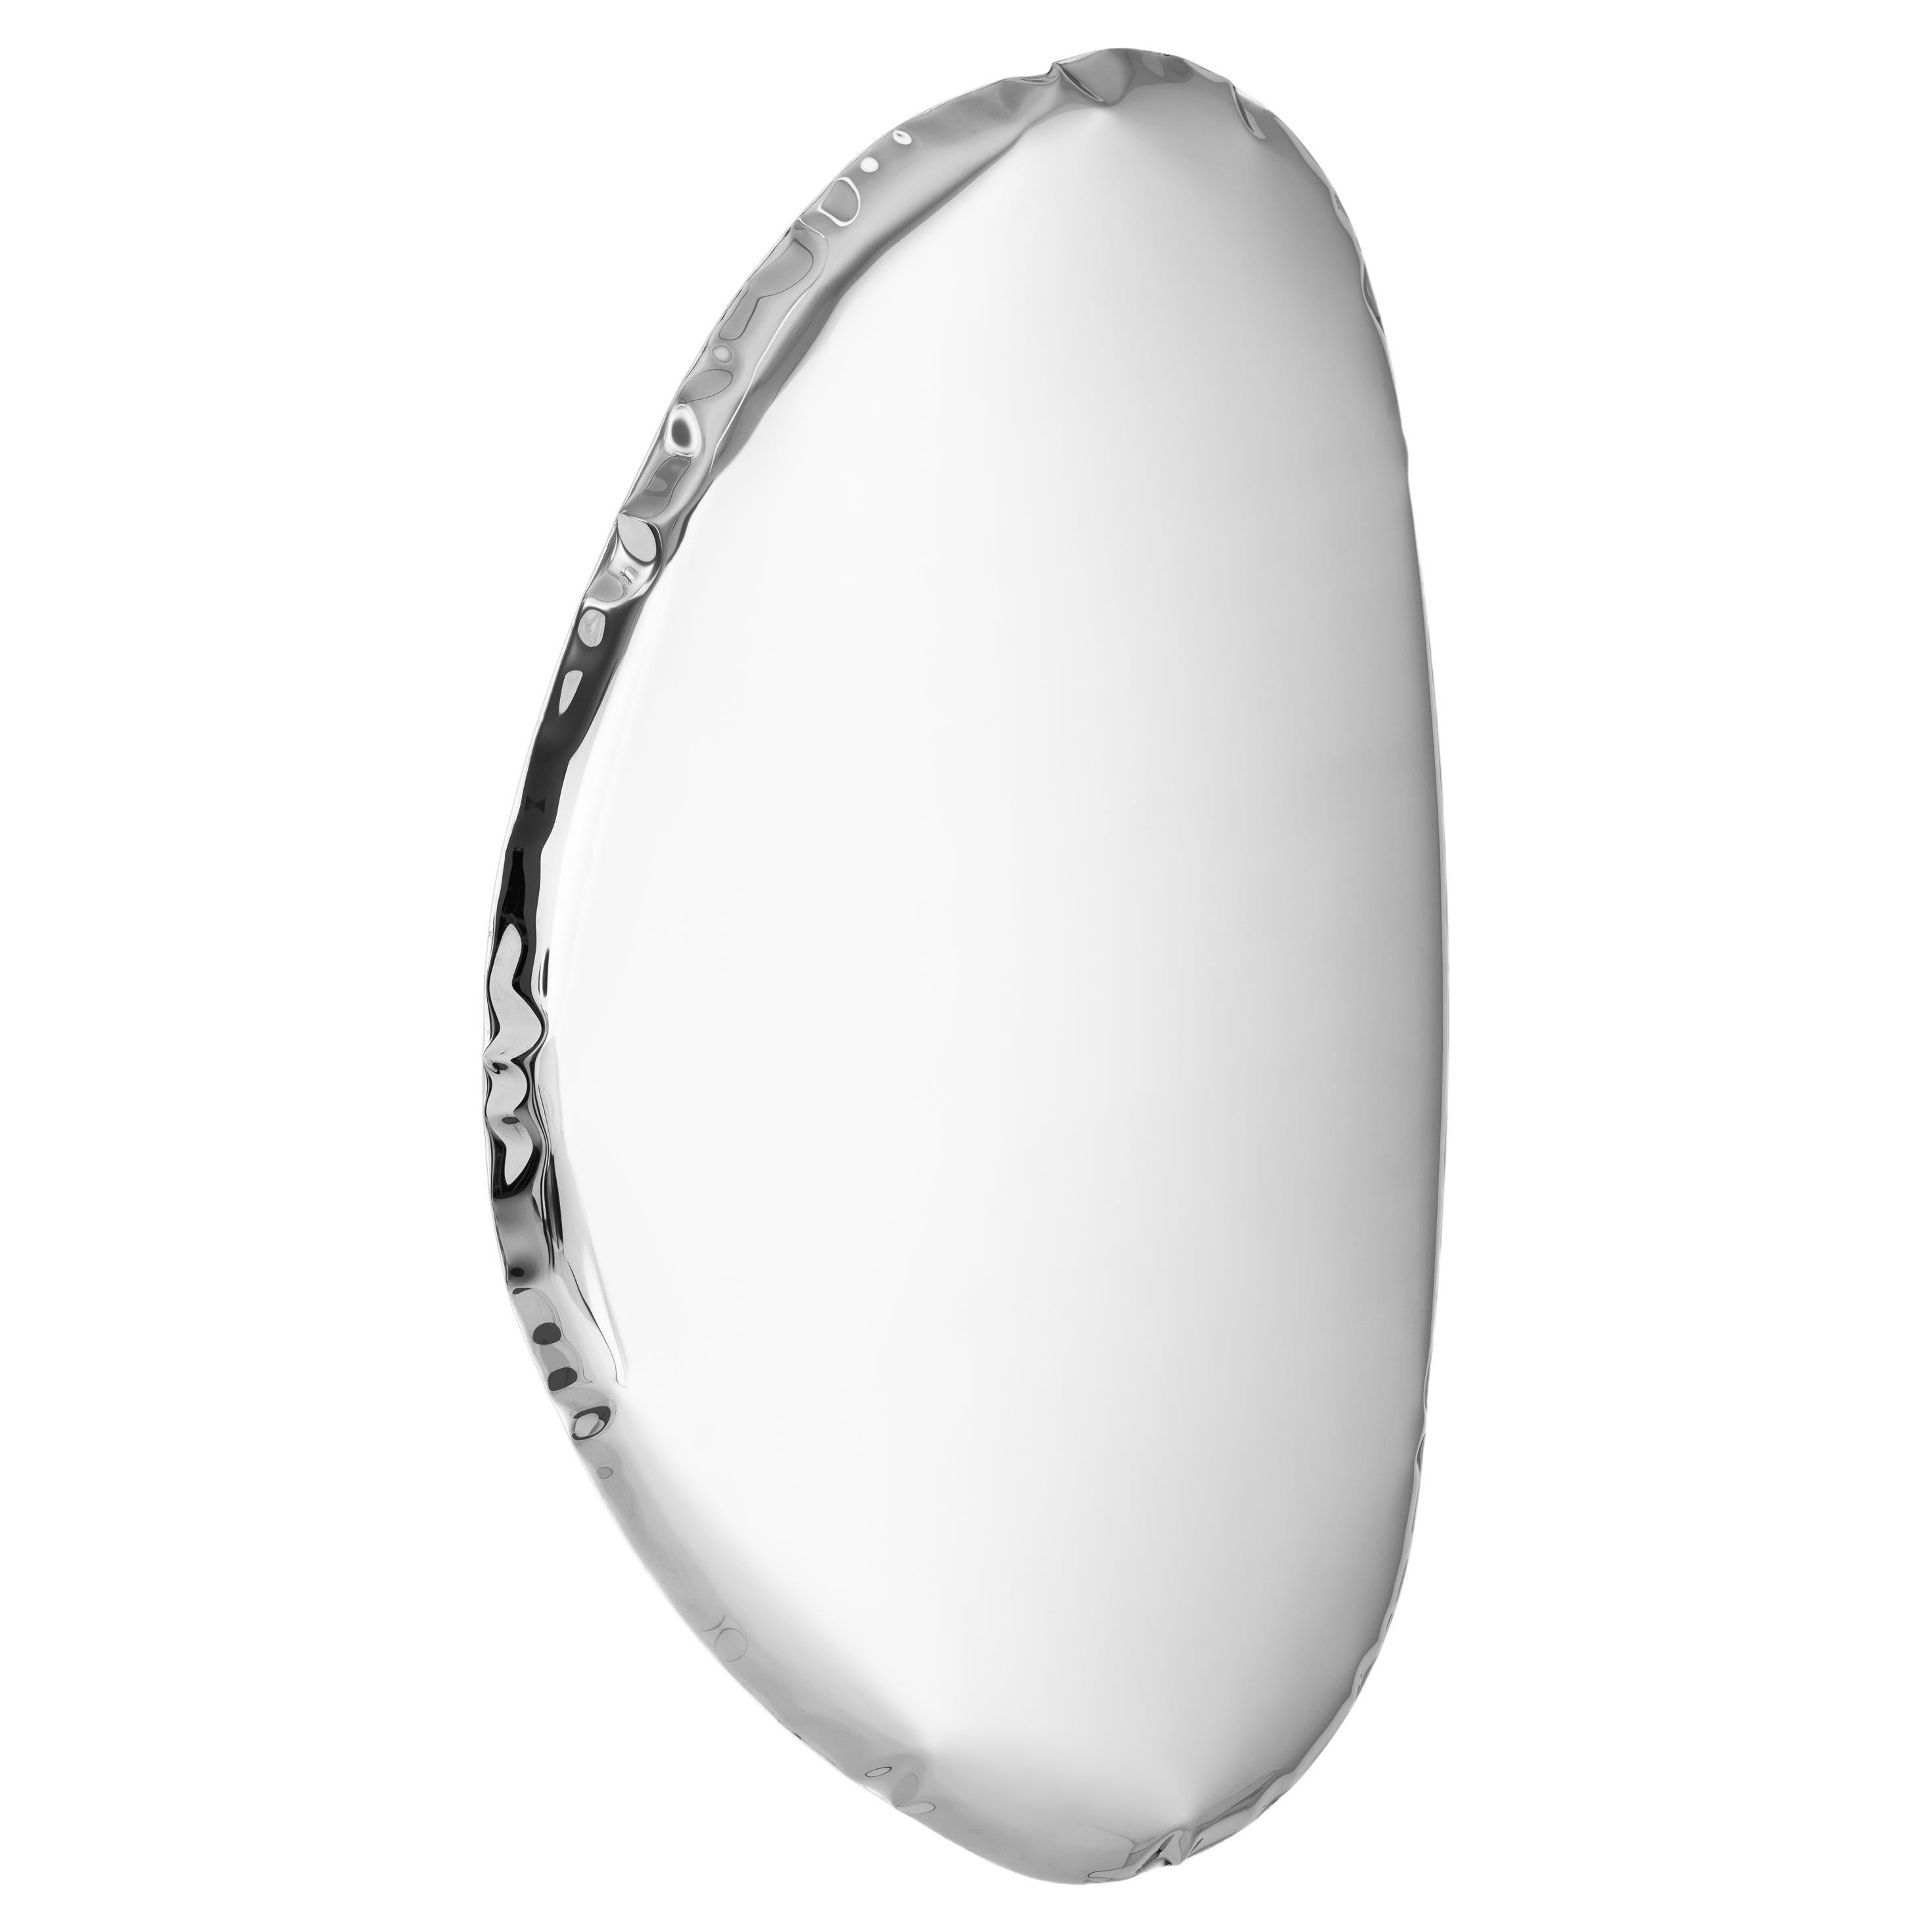 Tafla O3 Polished Stainless Steel Wall Mirror by Zieta For Sale